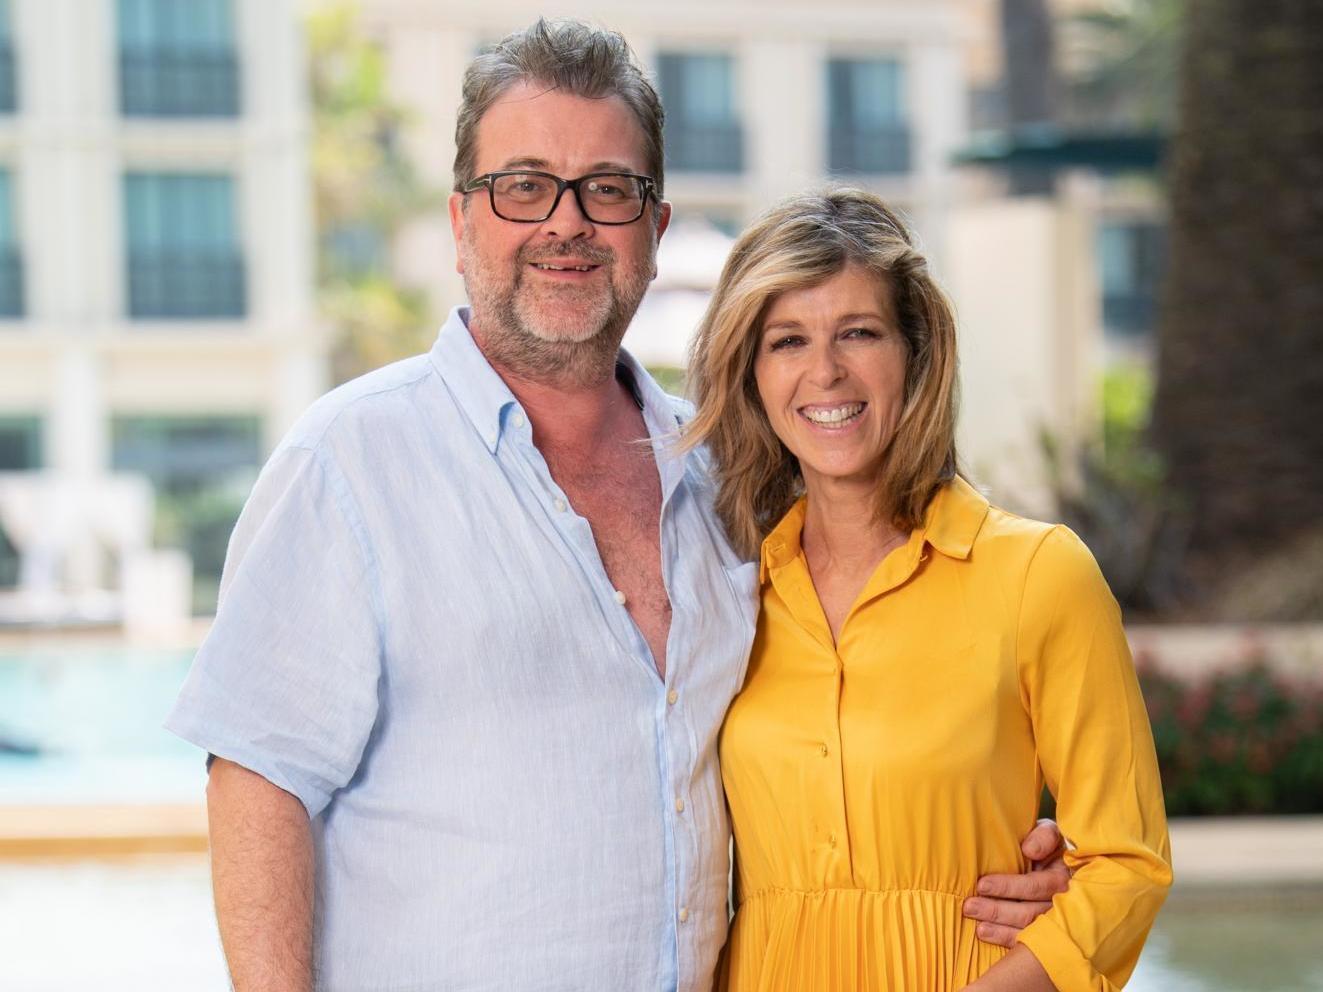 Derek Draper, left, supports Kate Garraway's career and net worth. In turn, she has brought to light the realities of how his struggle with the Coronavirus has affected families.